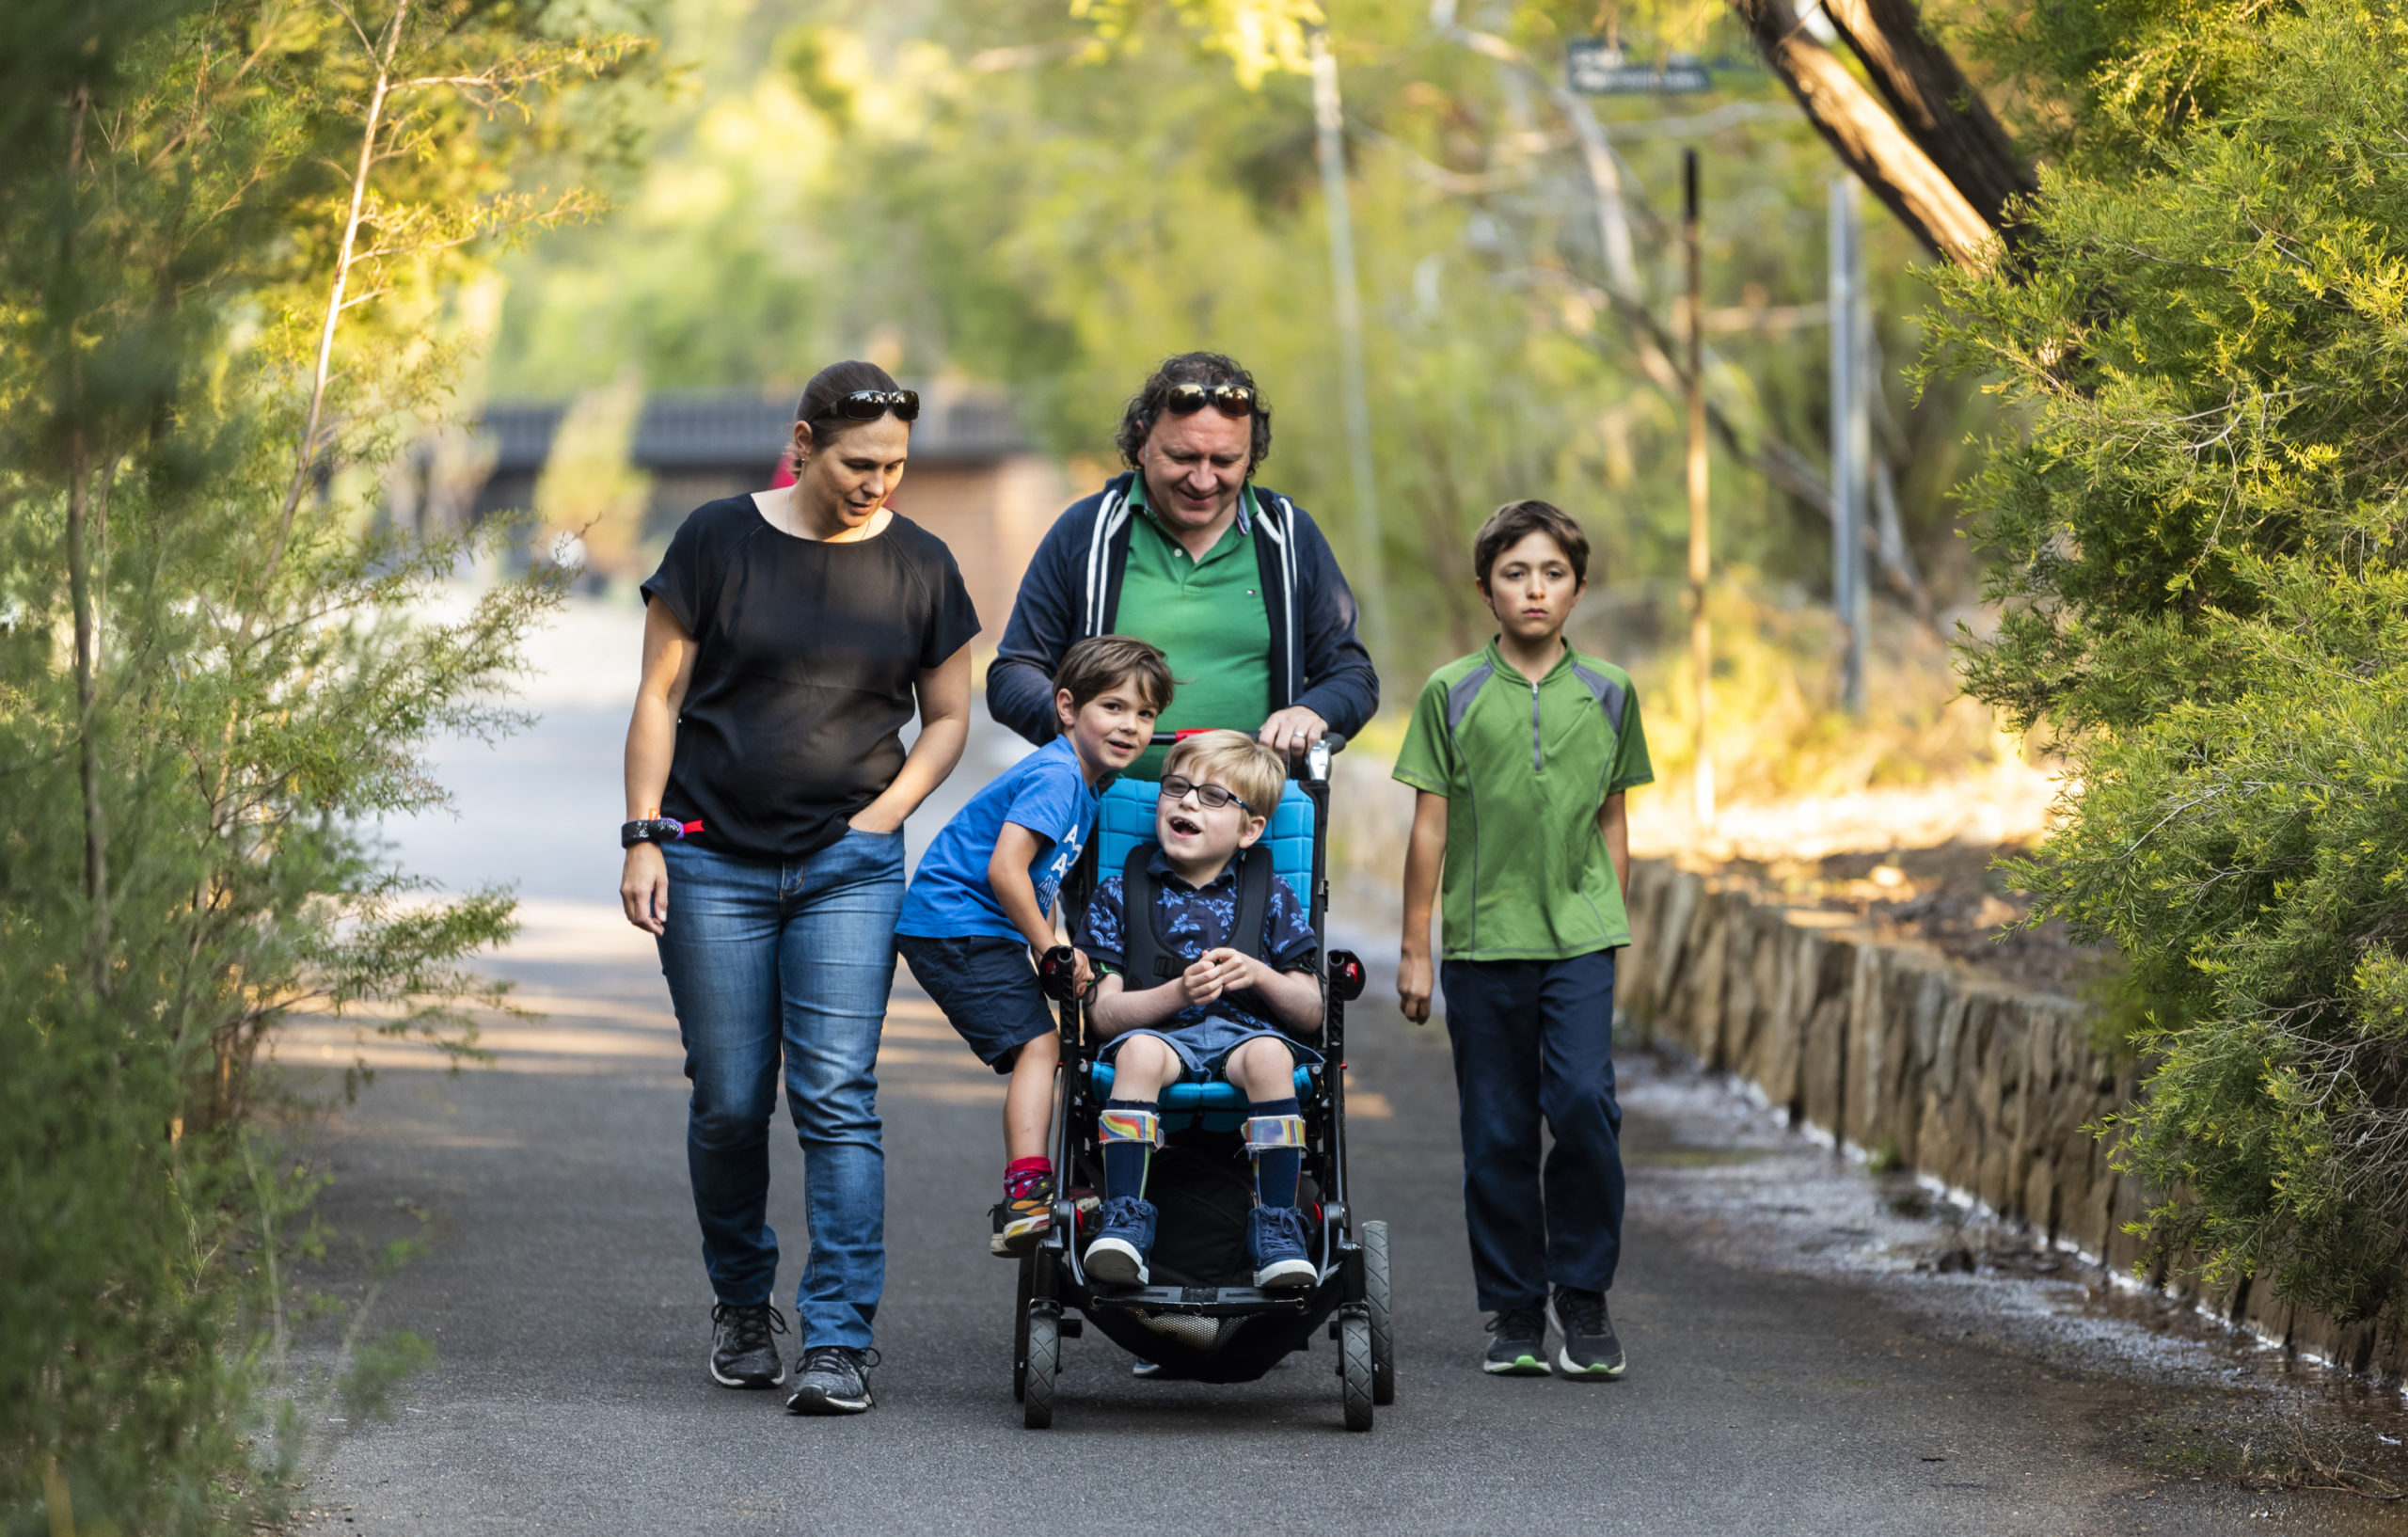 GetAboutAble promotes Canberra as an accessible destination